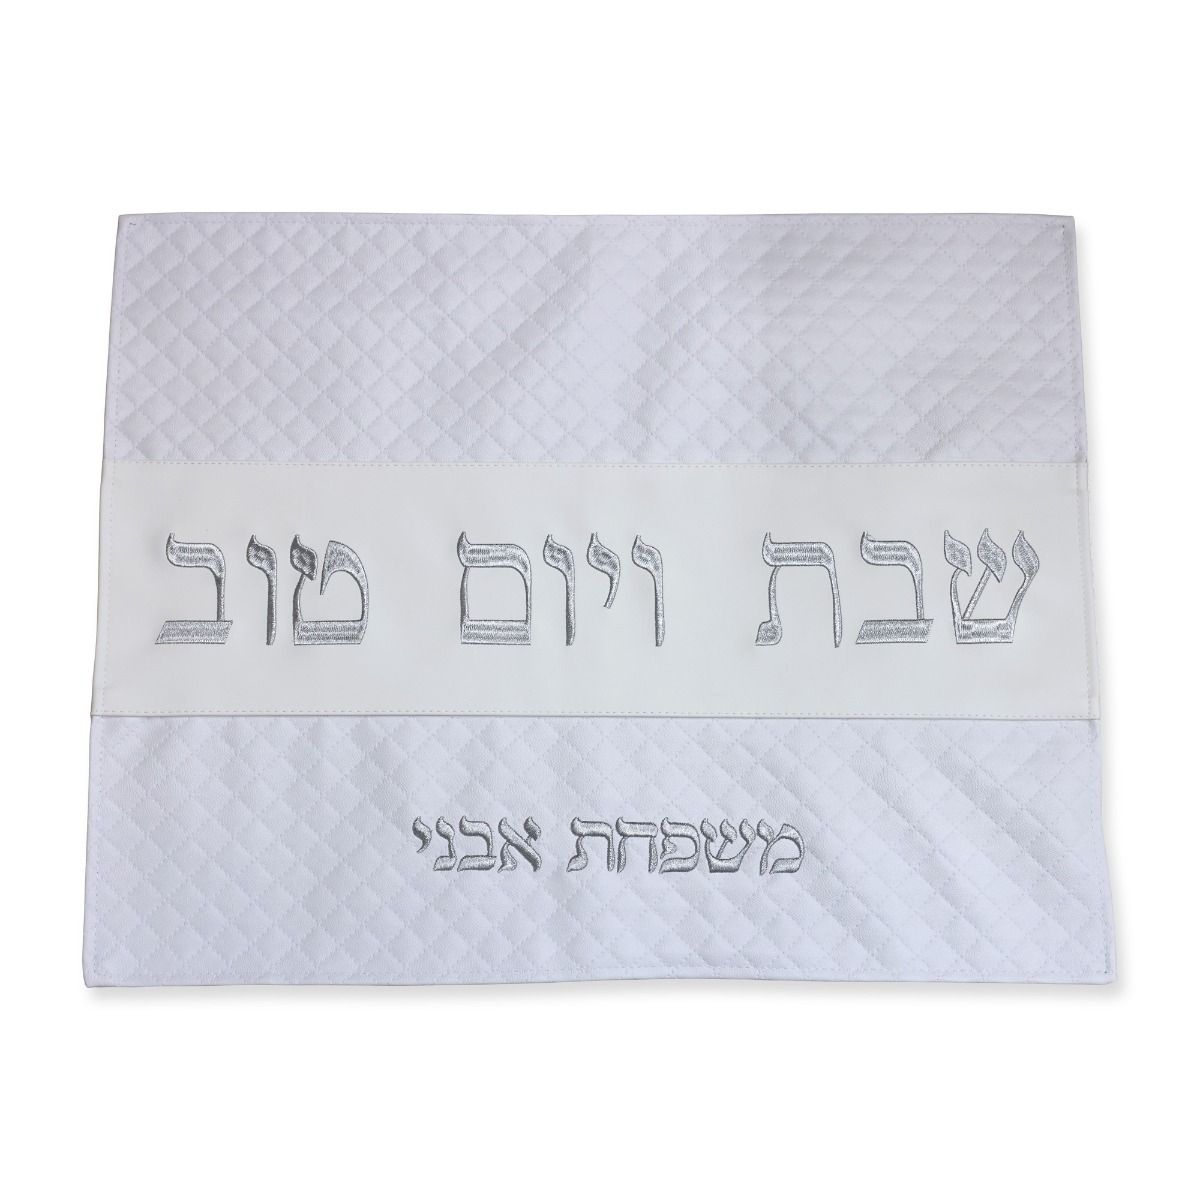 Personalized Embroidered Shabbat Challah Cover - White - 1